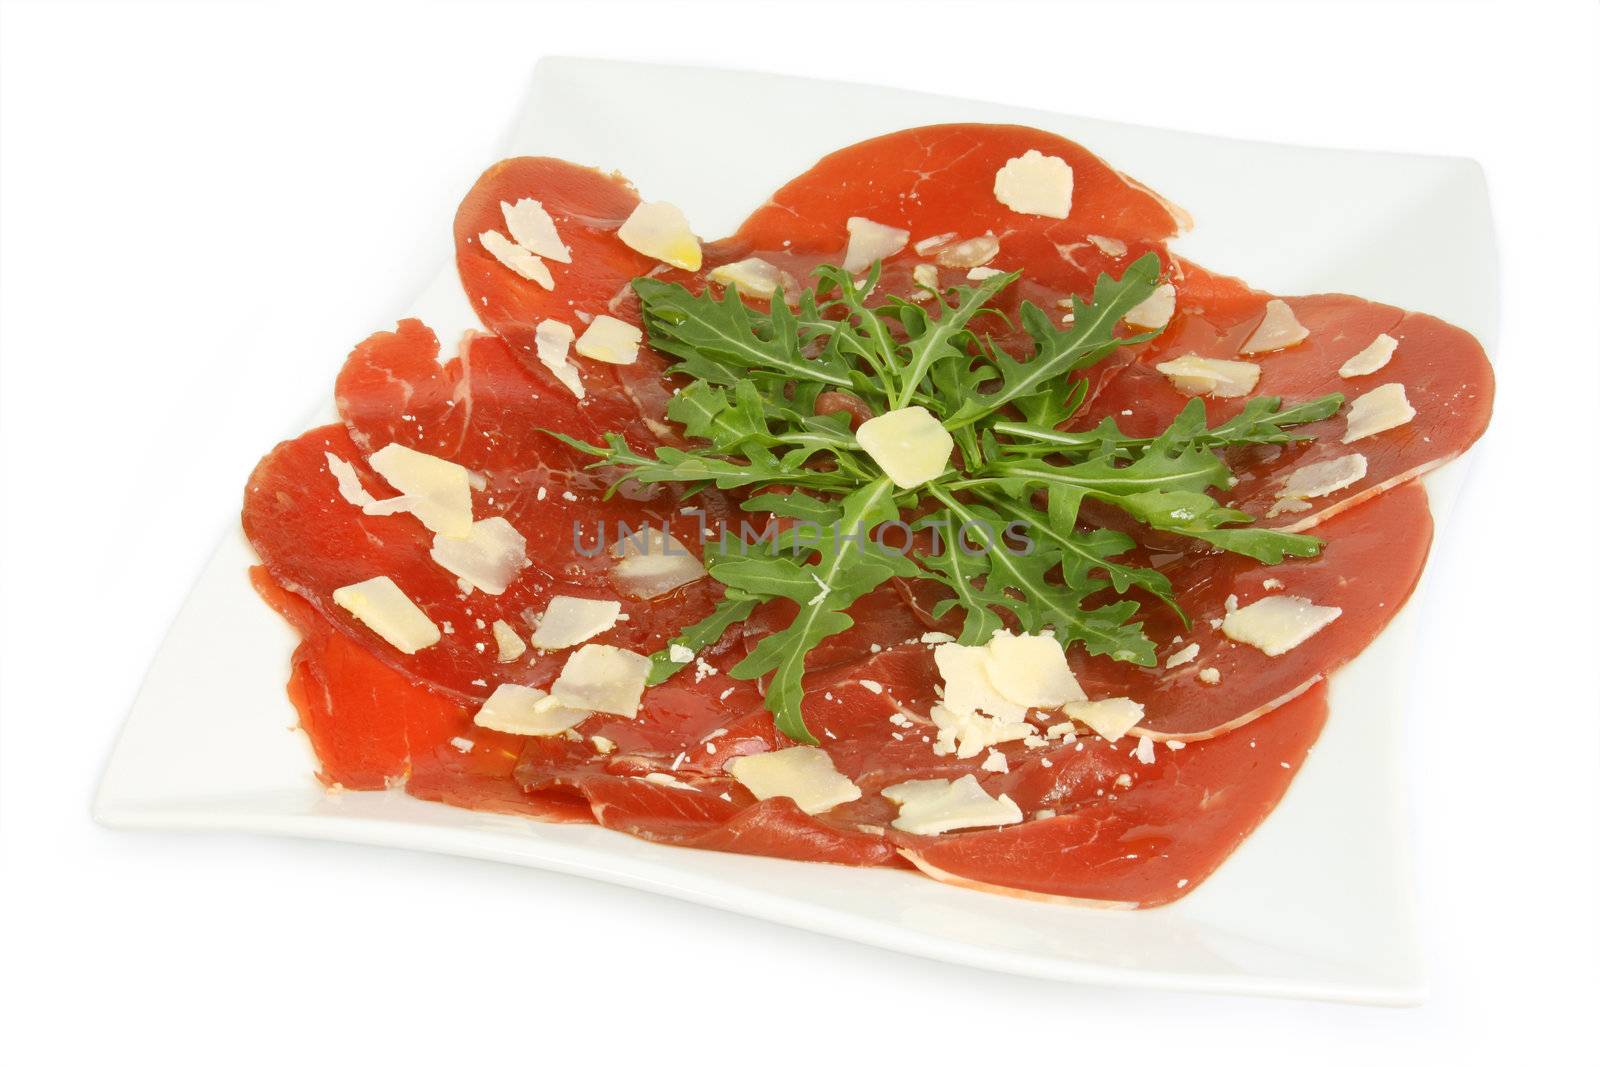 Beef carpaccio with pepper, rucola and parmesan